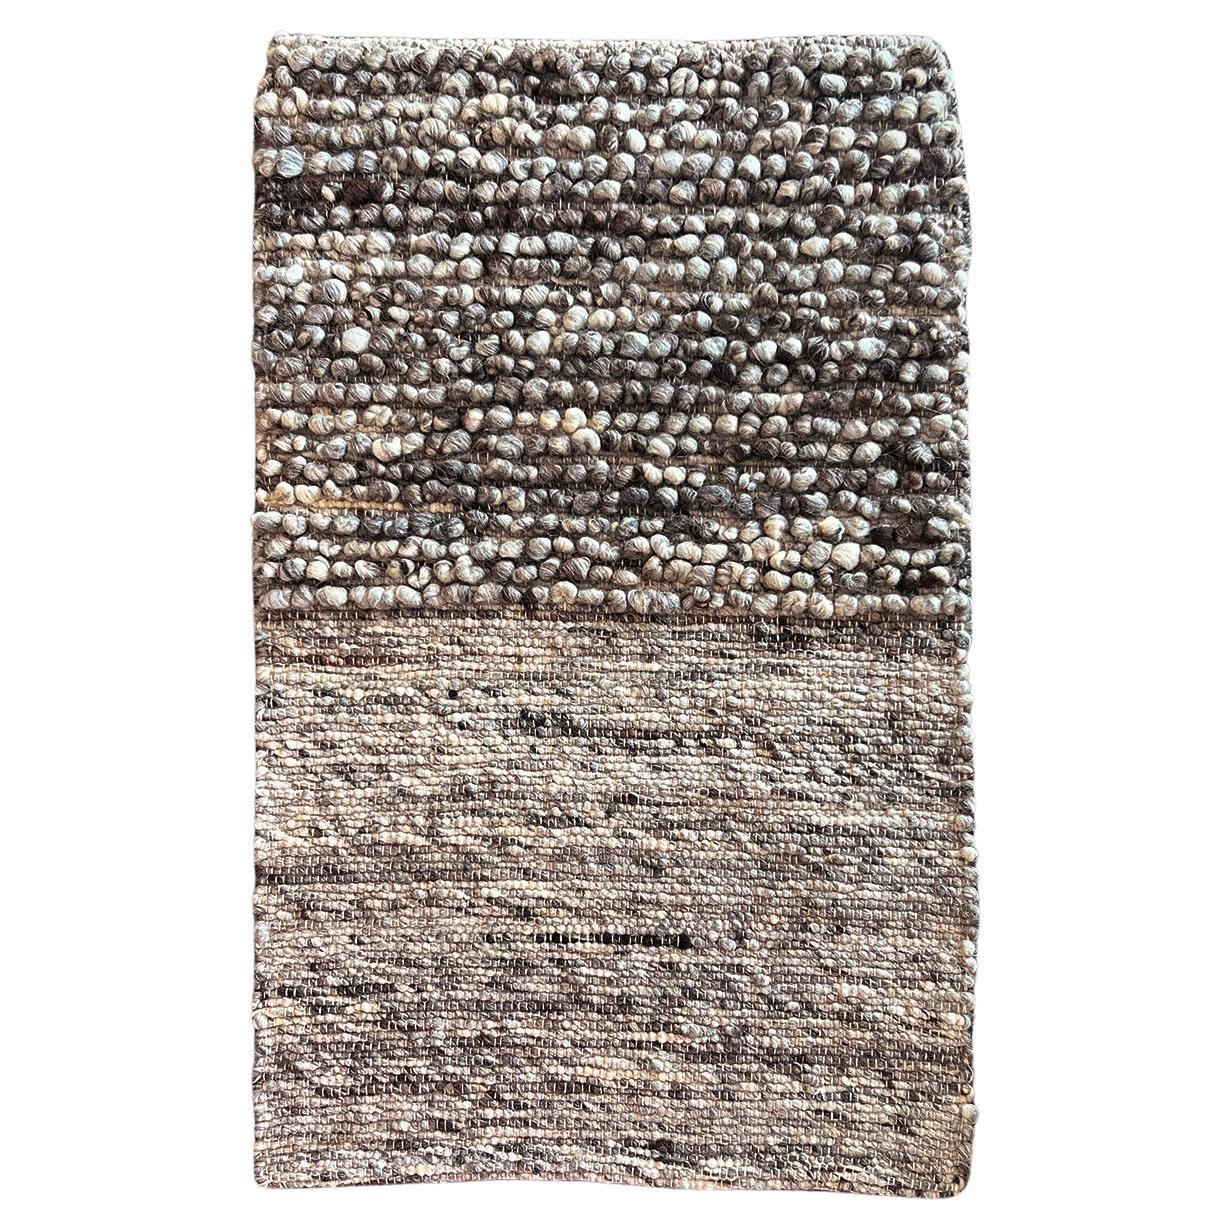 Fatima Half Bobble Sheep Wool Area Rug in Gray 2.5ft by 4ft, Handmade